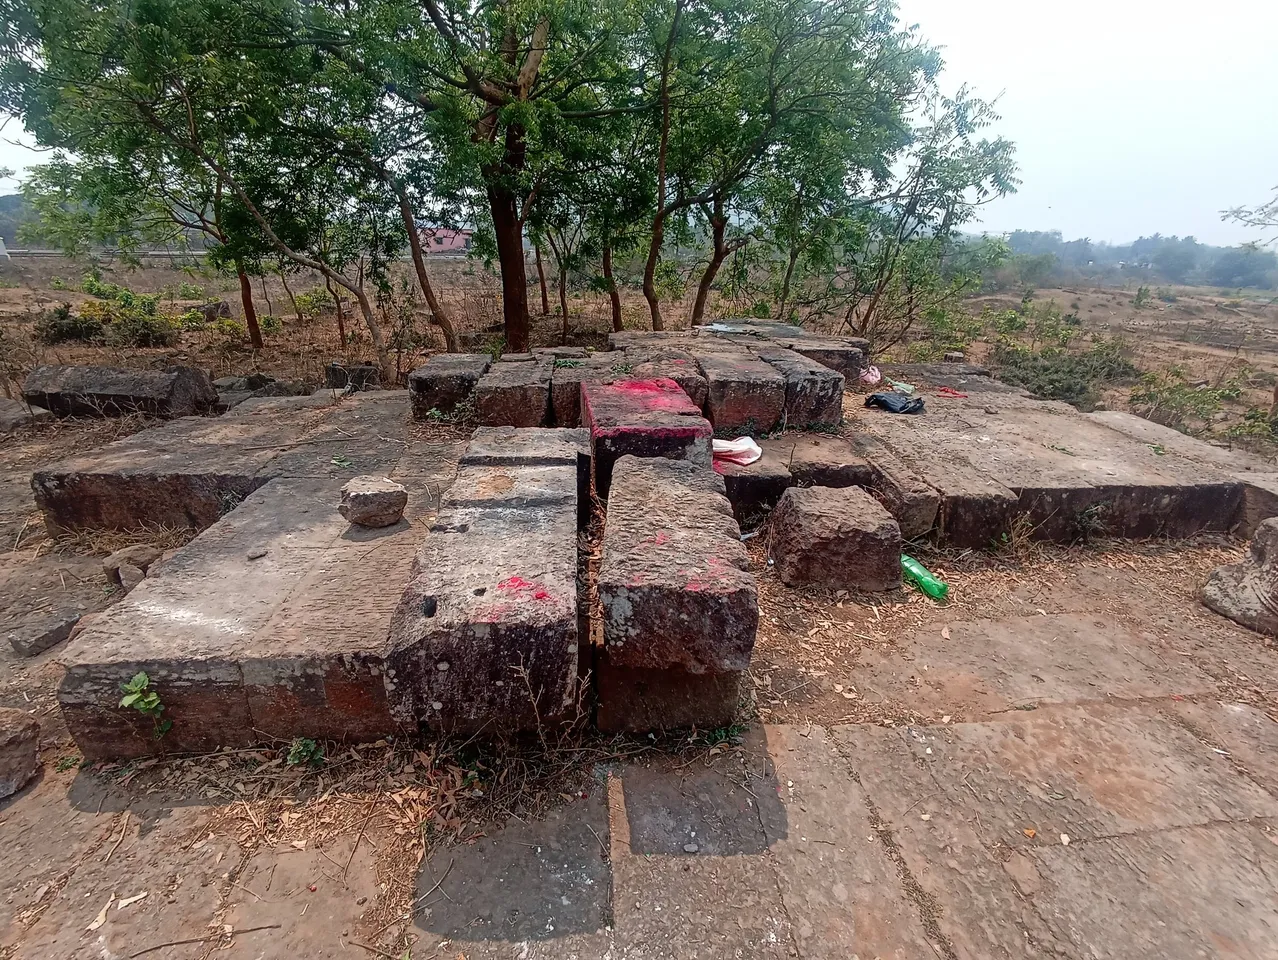 Remains of 13th century temple found in Jajpur